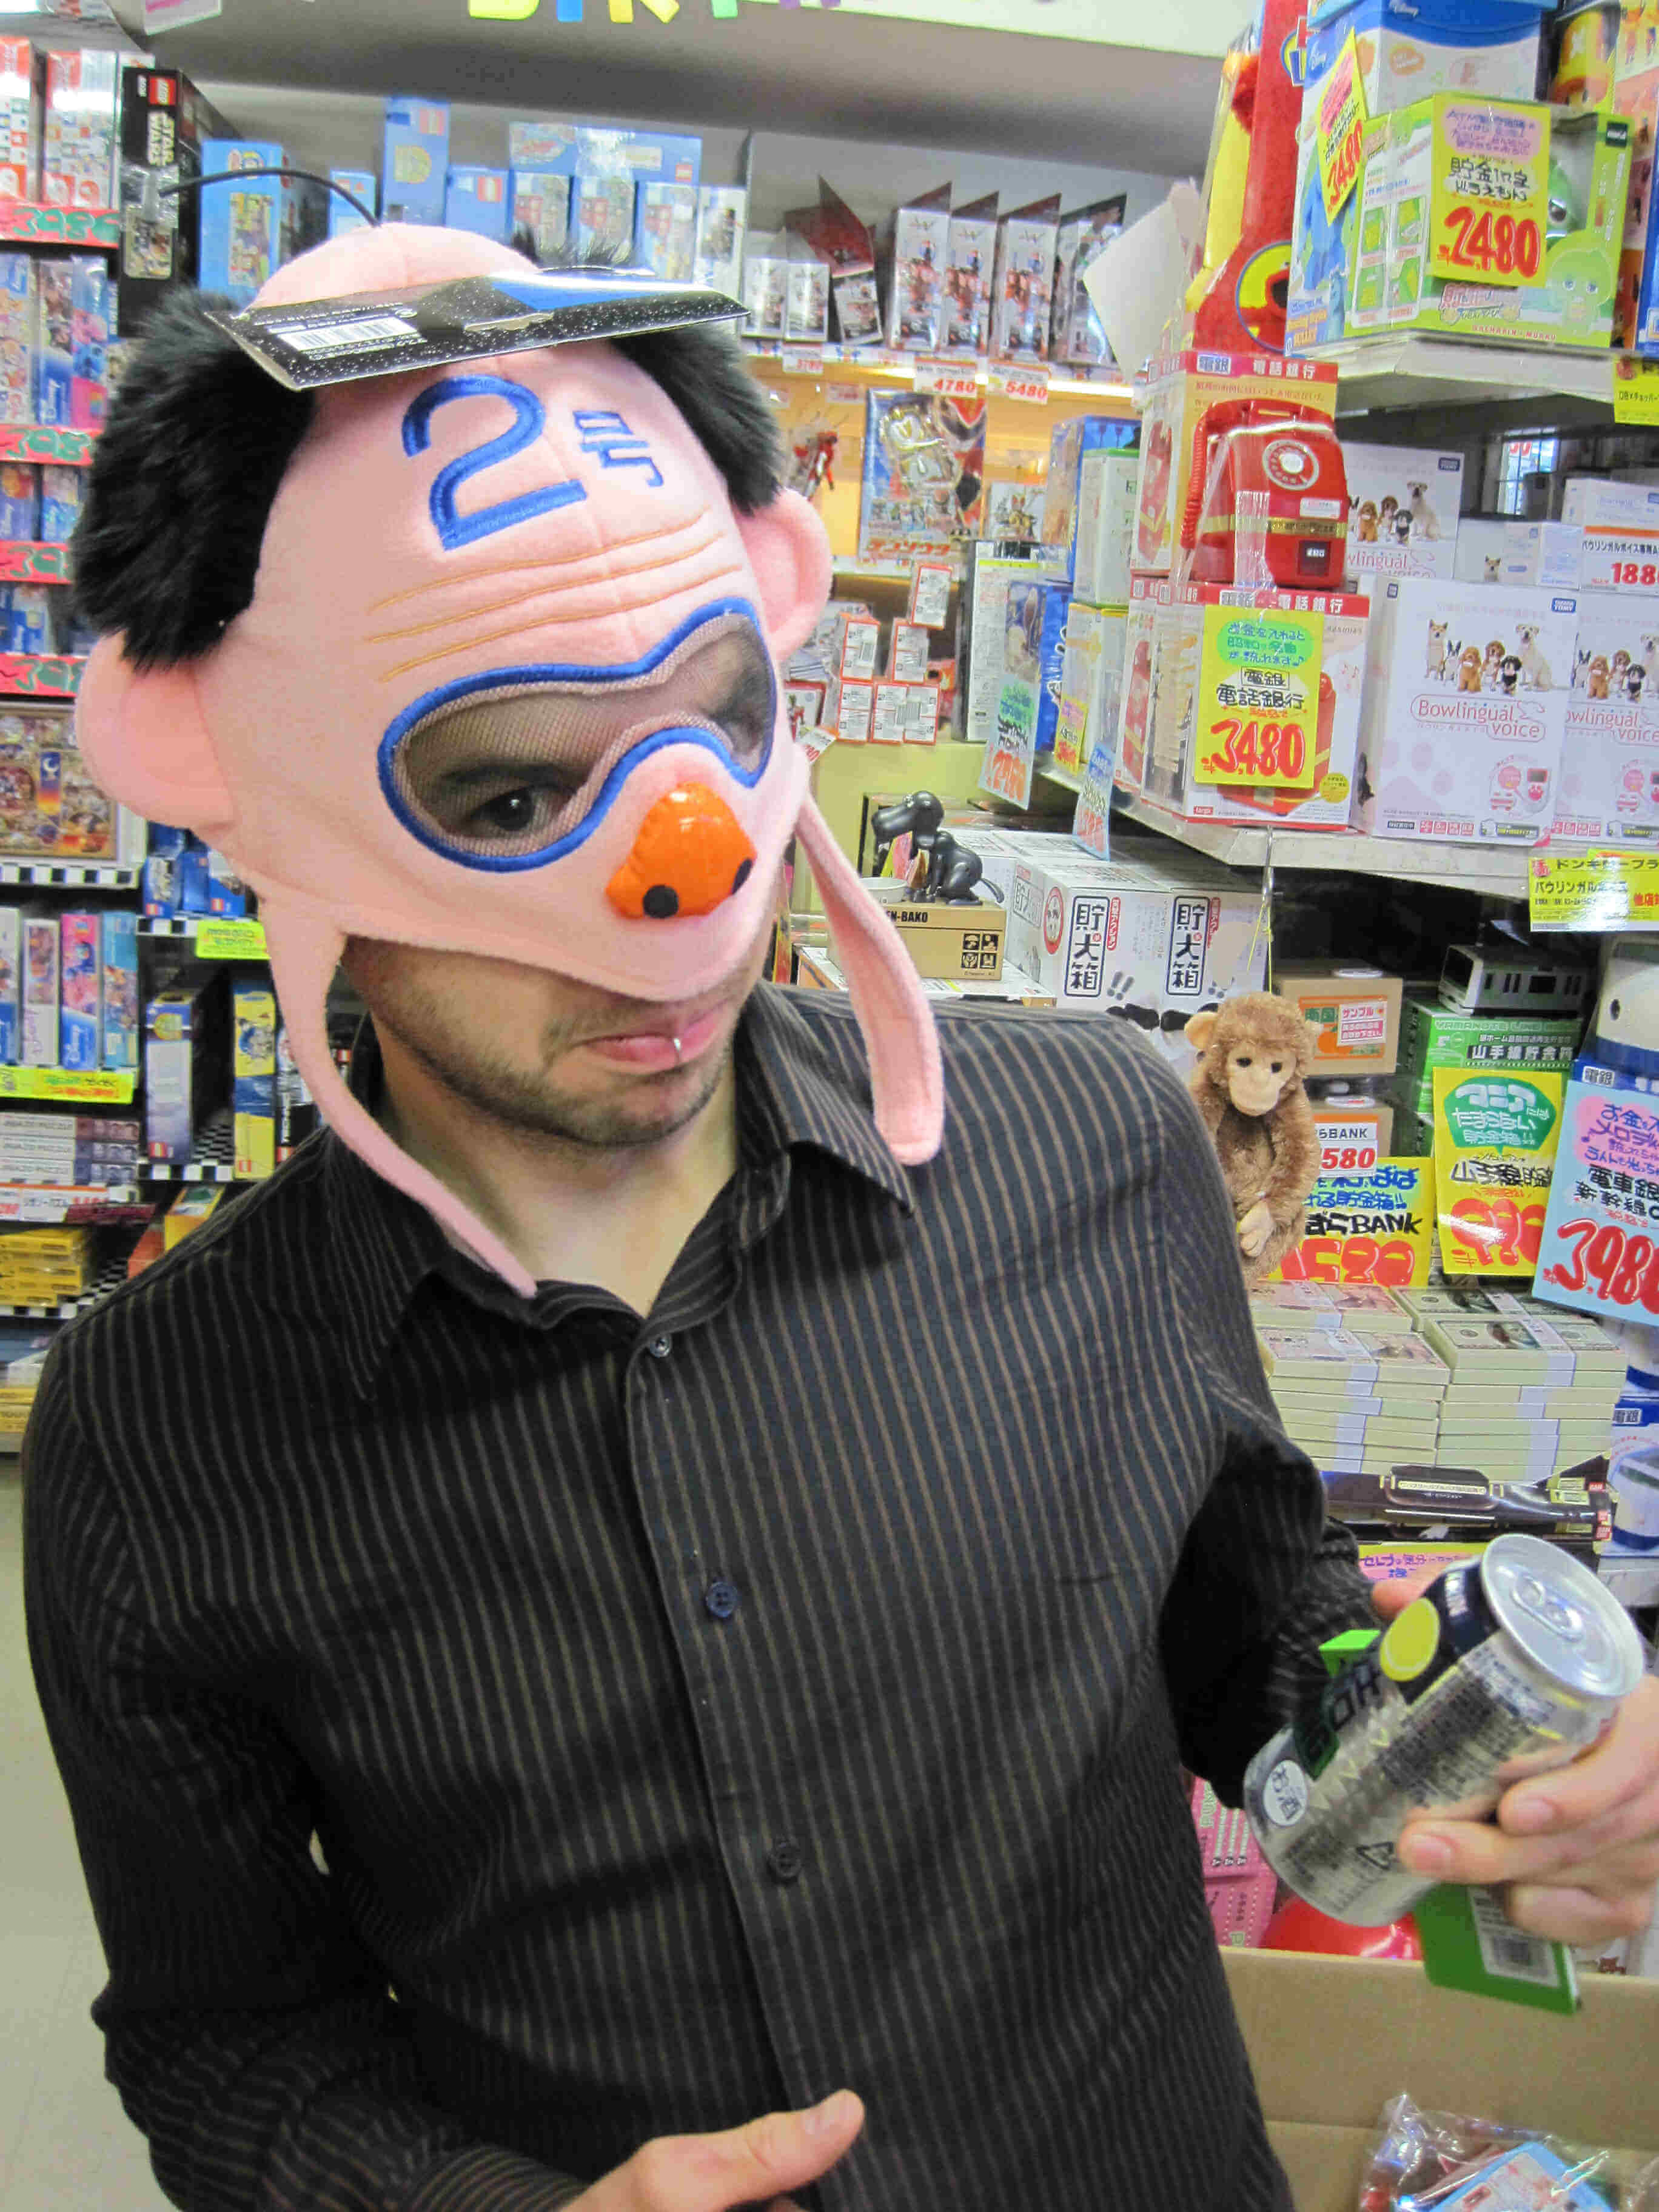 Front view of a person in a Japanese retail store, wearing a costume pig head mask over their head